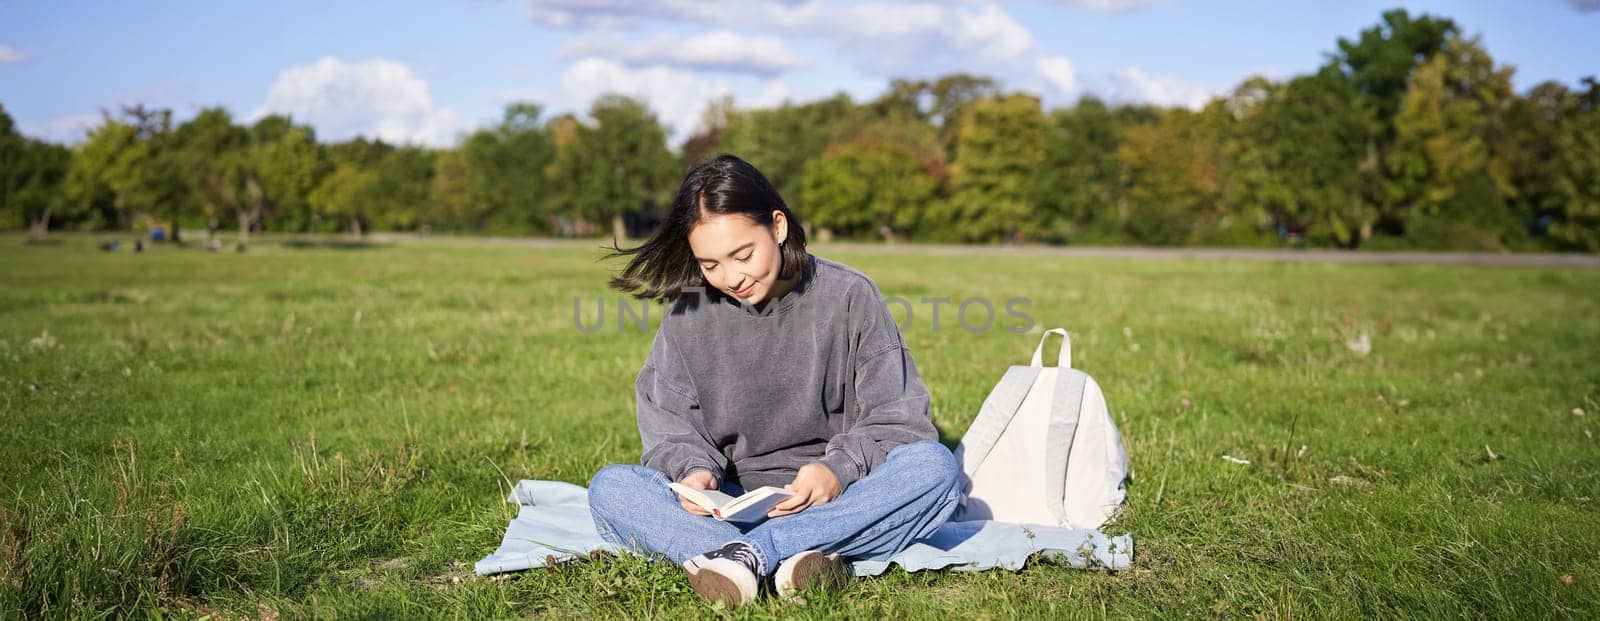 Portrait of asian girl reading book, sitting on her blanket in park, with green grass, smiling happily.